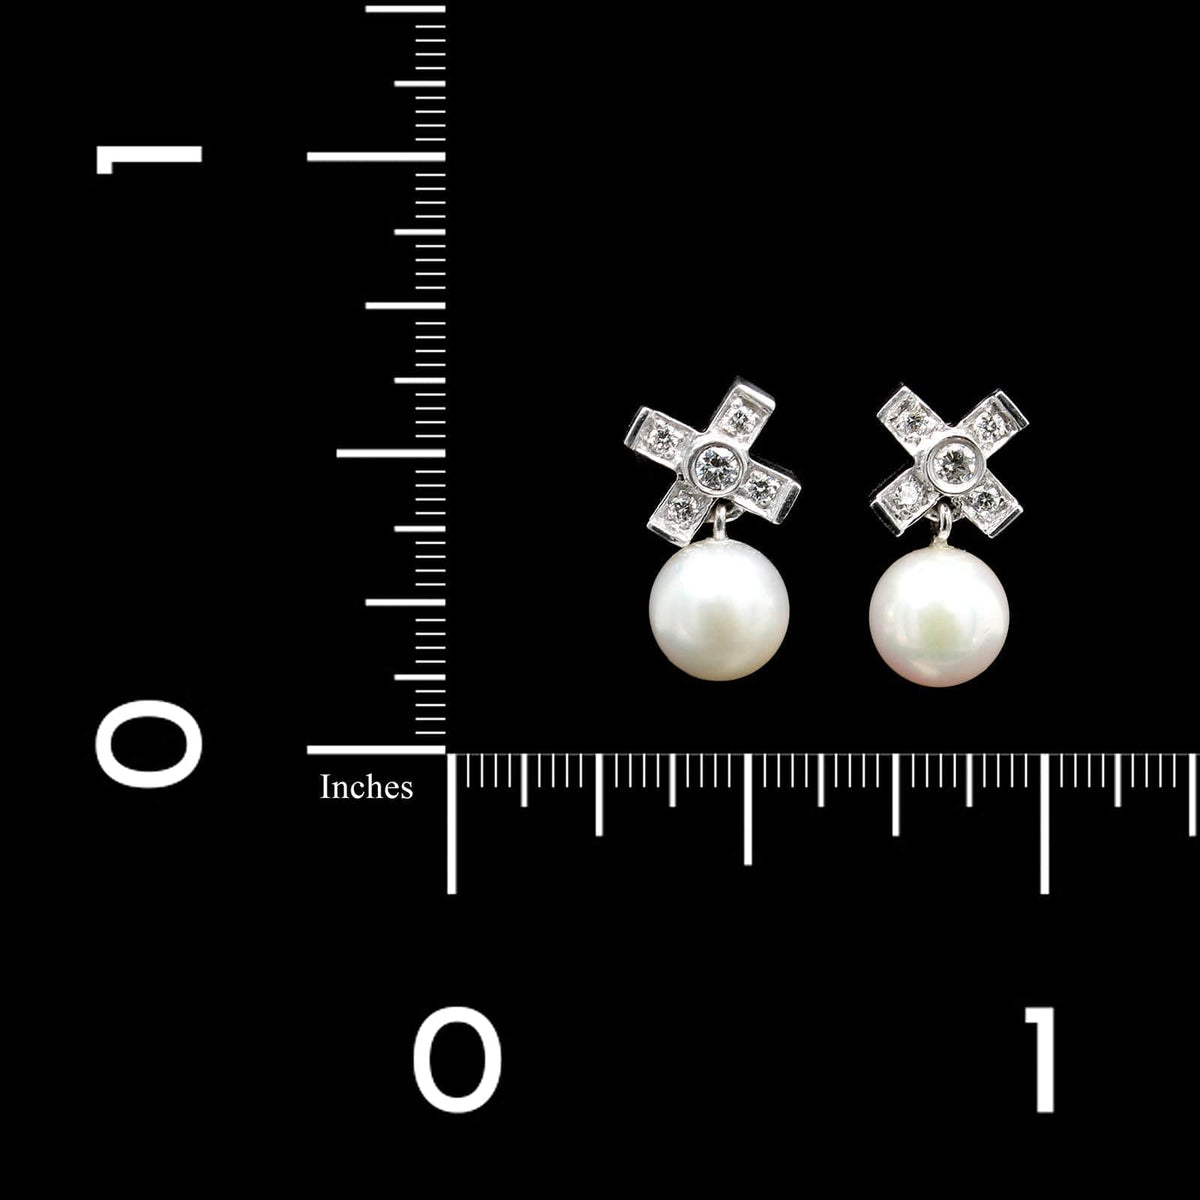 14K White Gold Estate Cultured Pearl and Diamond Earrings, Long's Jewelers